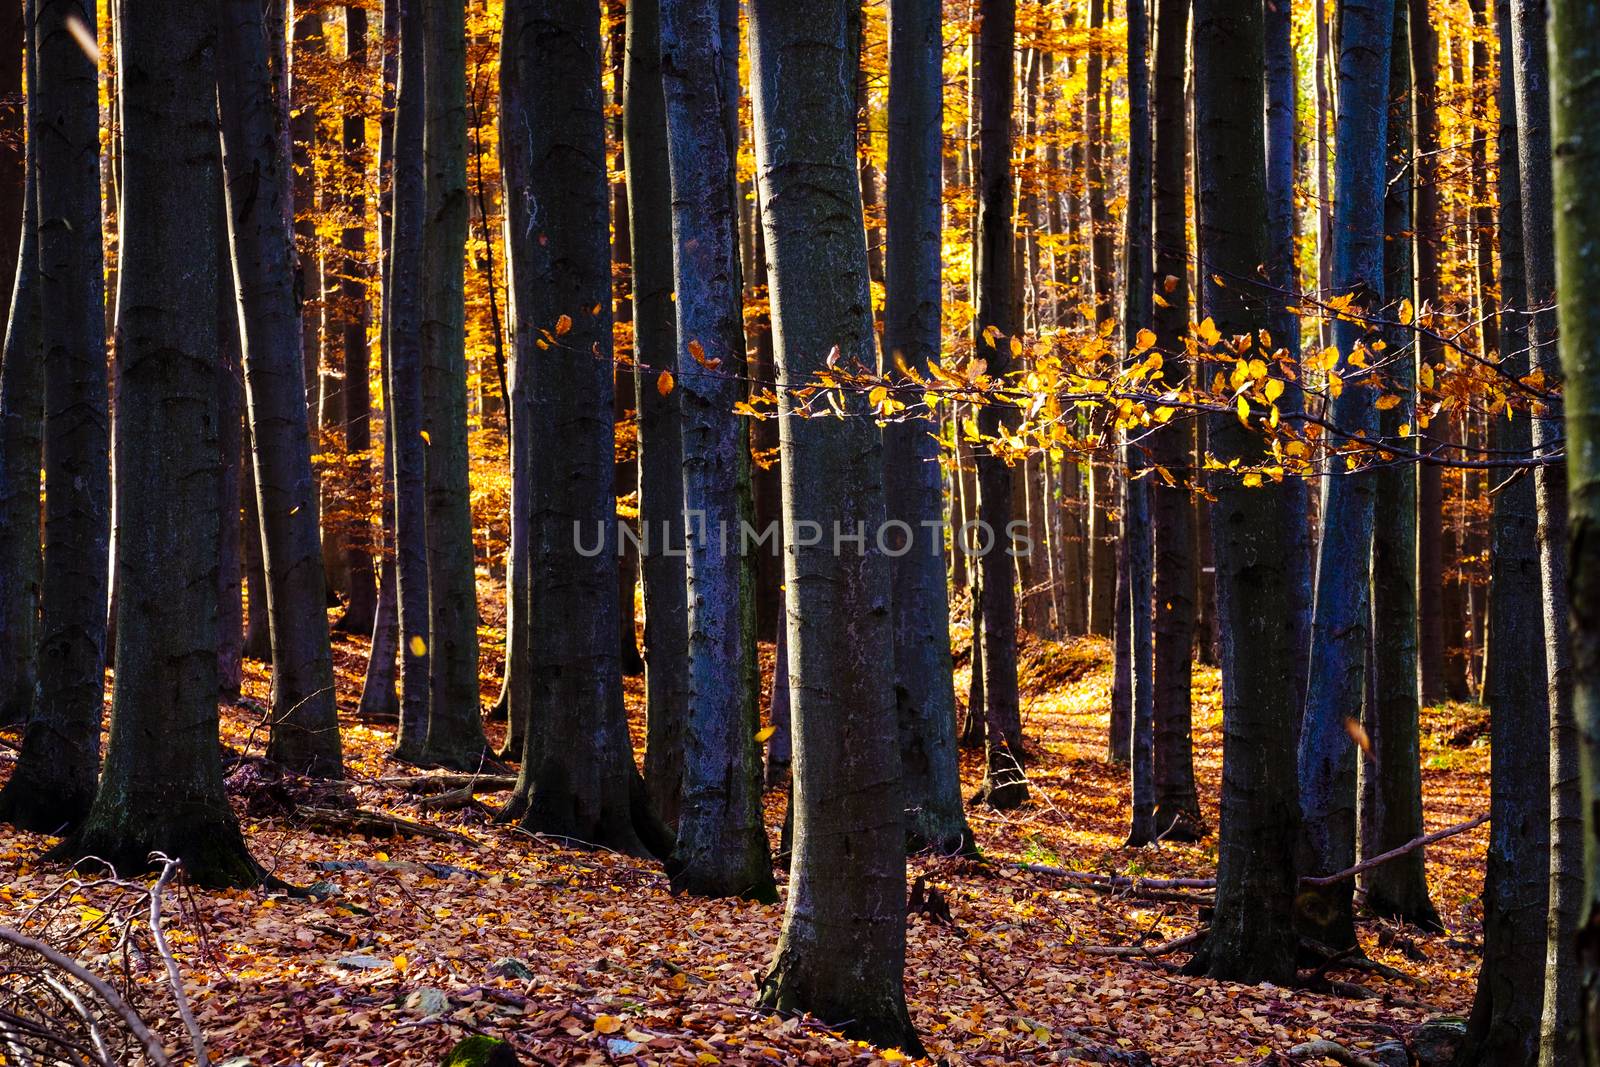 Landscape view of autumn colorful forest trees and foliage